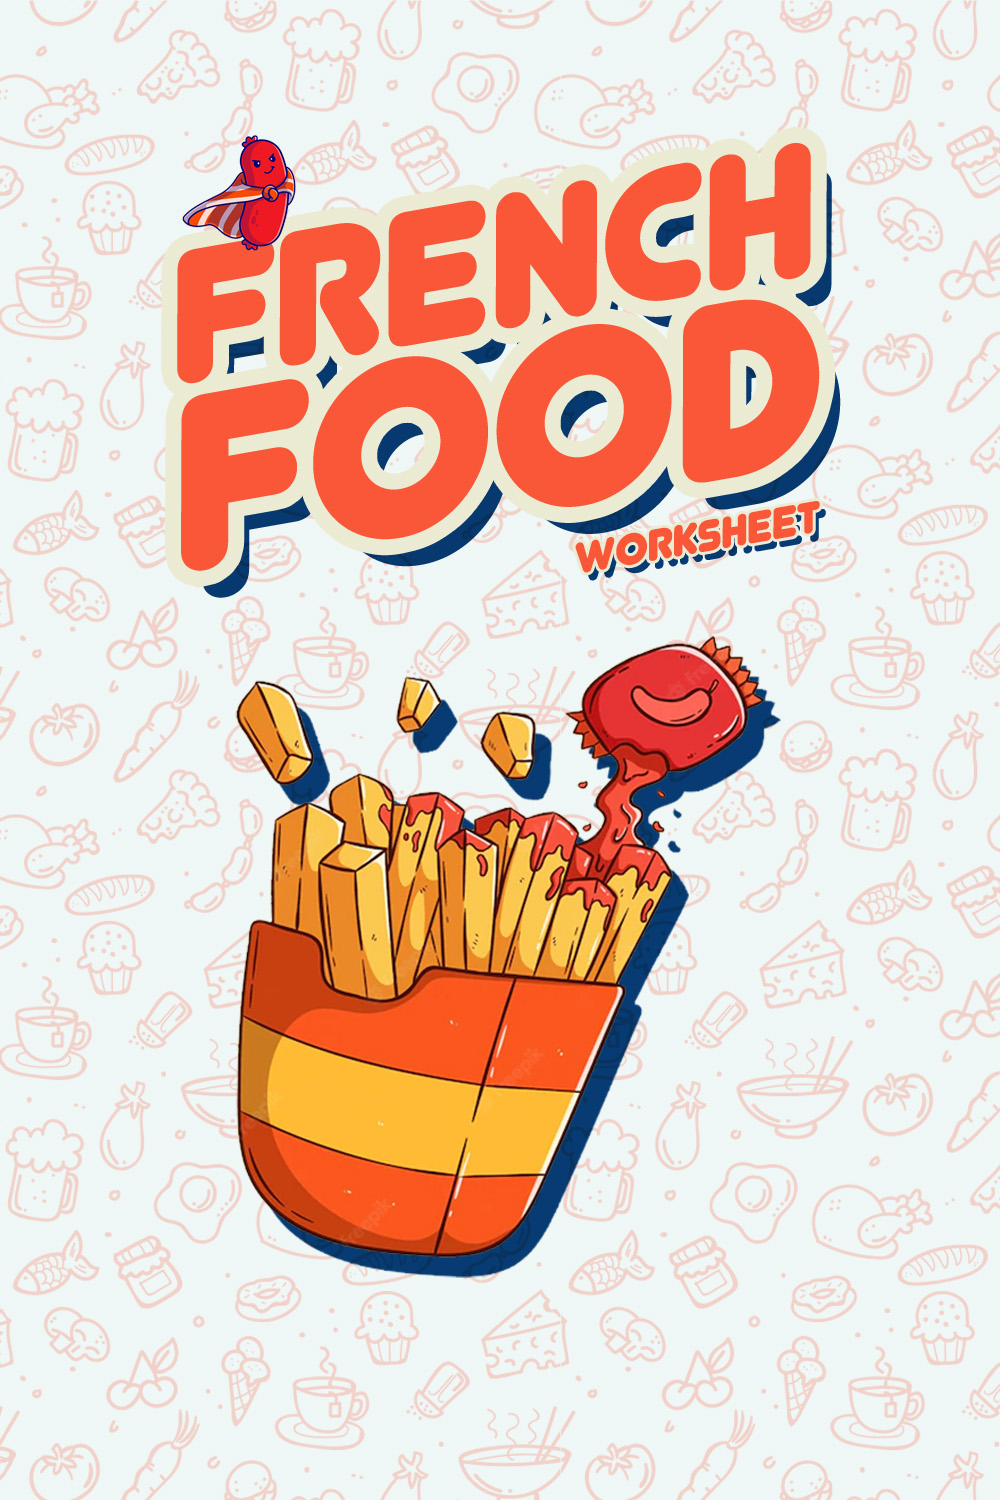 14 Images of Printable Worksheets For French Food